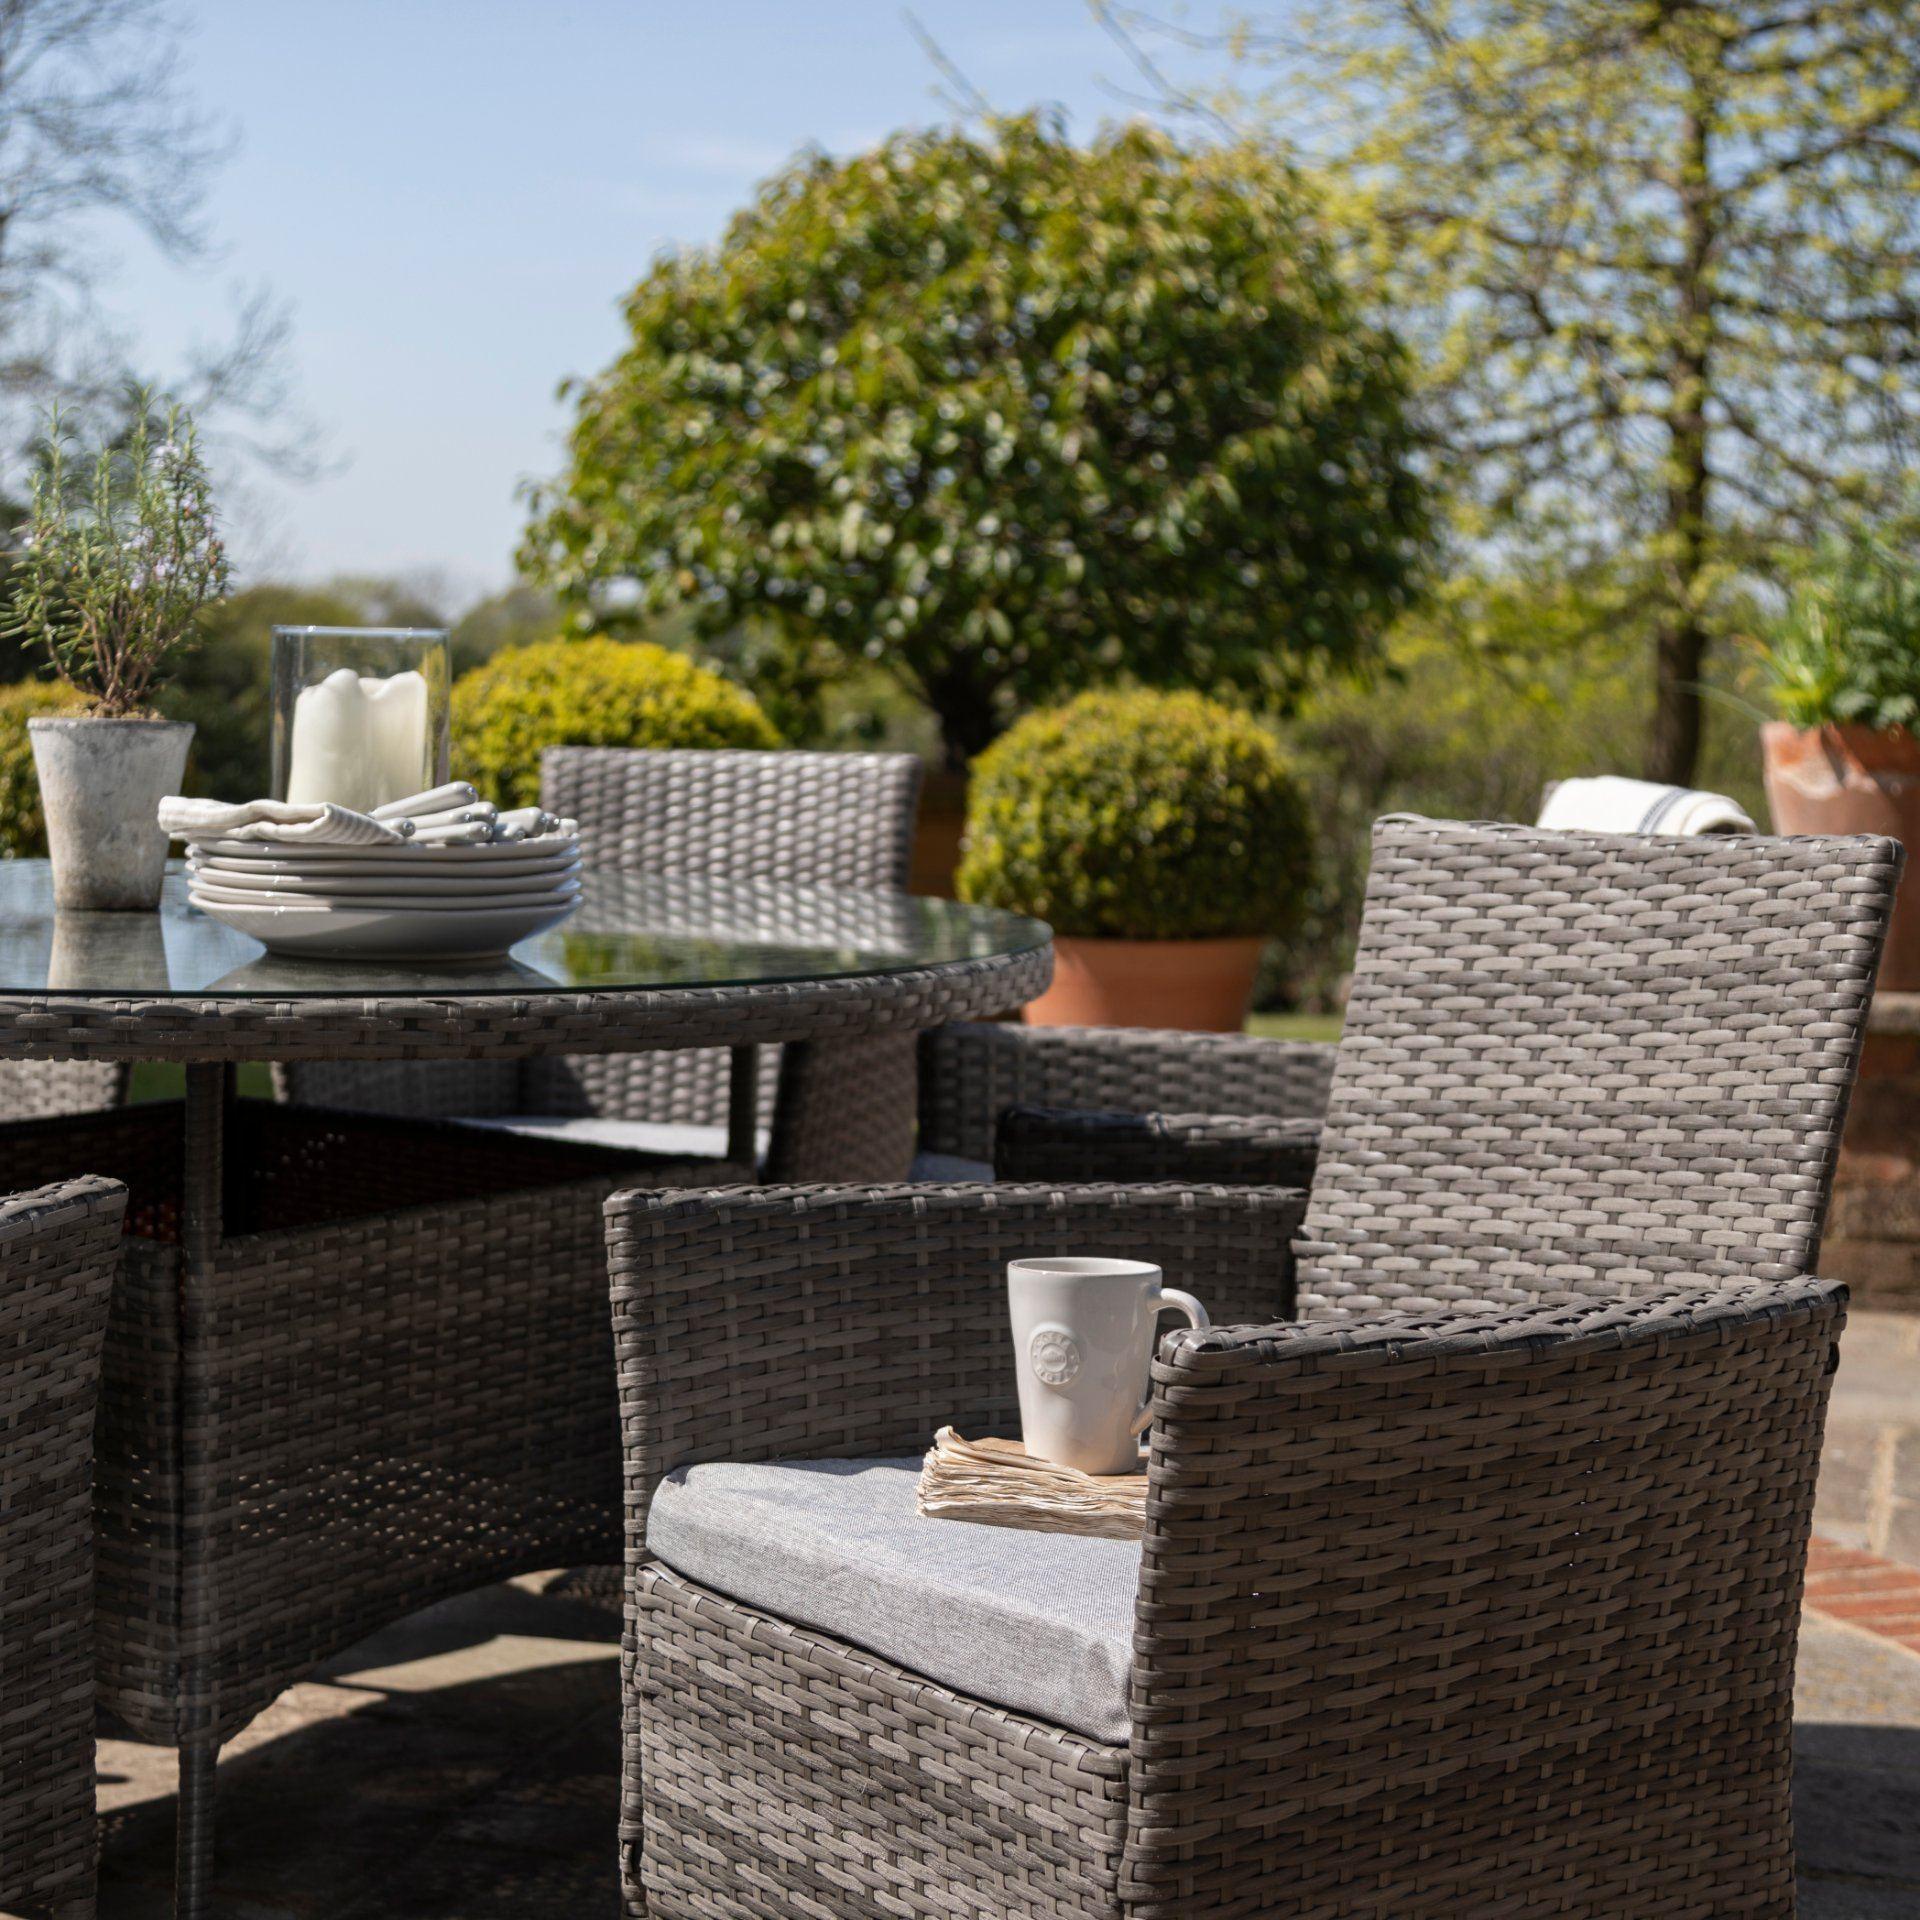 6 Seater Rattan Dining Table Set in Grey - Garden Furniture Outdoor - Laura James